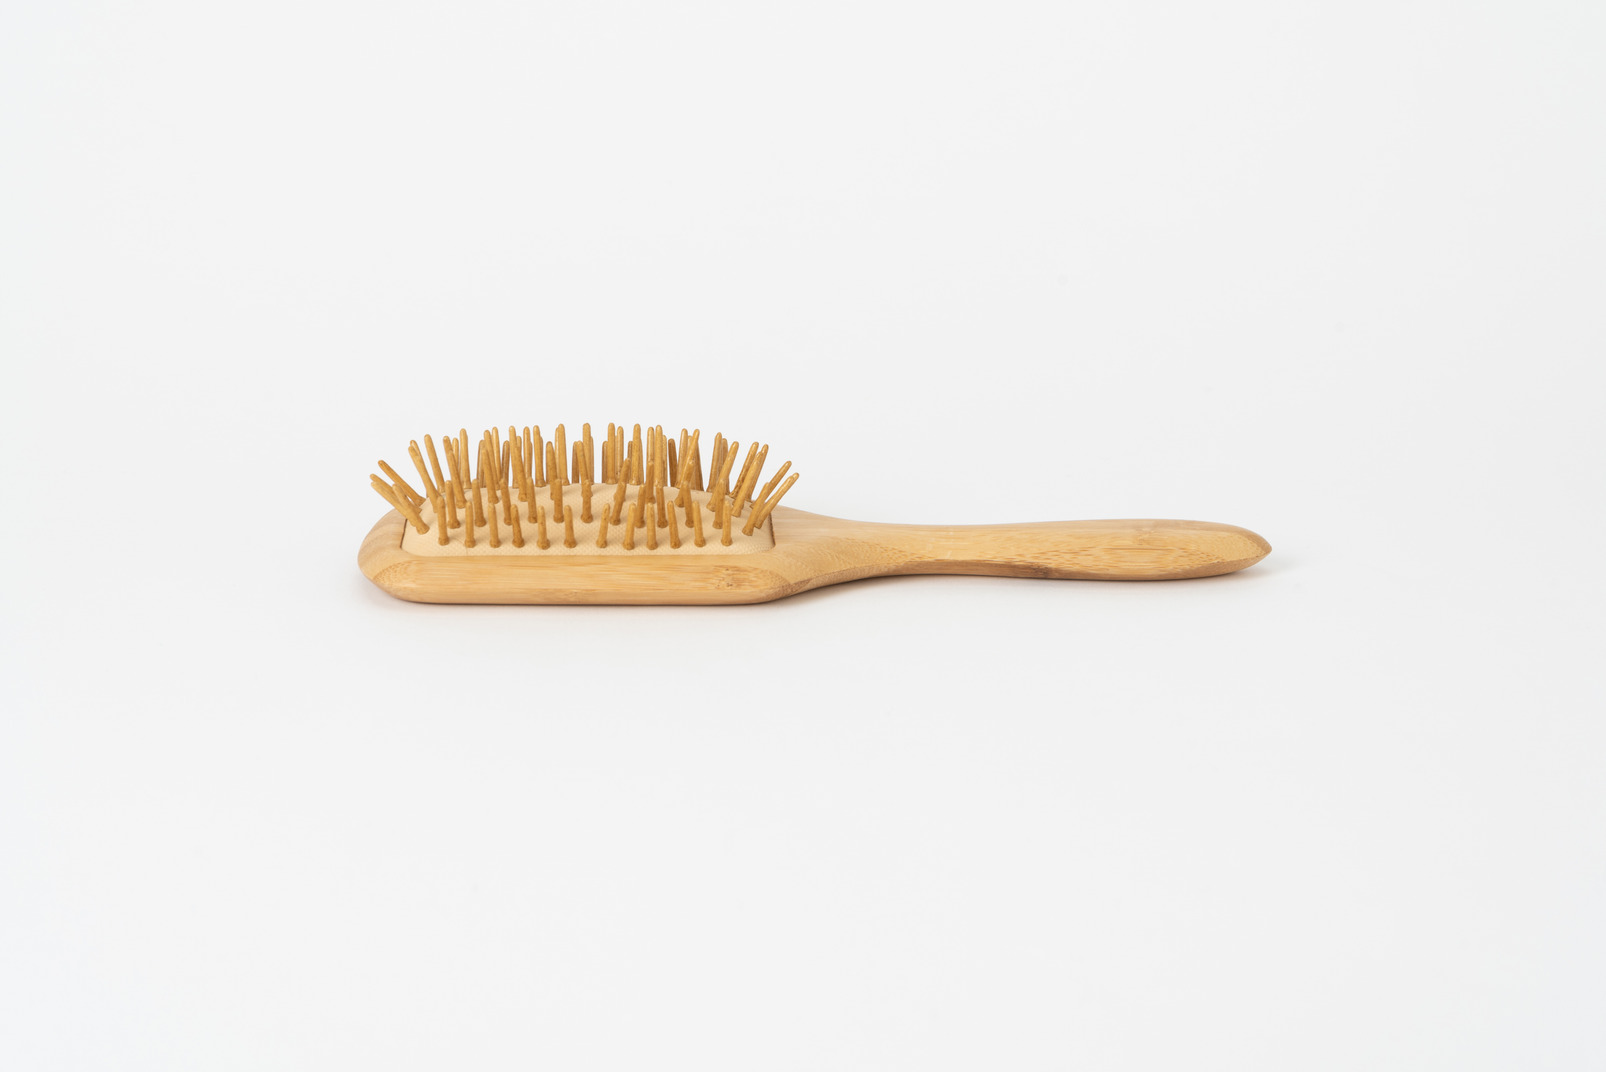 Wooden hair brushes are gentle and durable